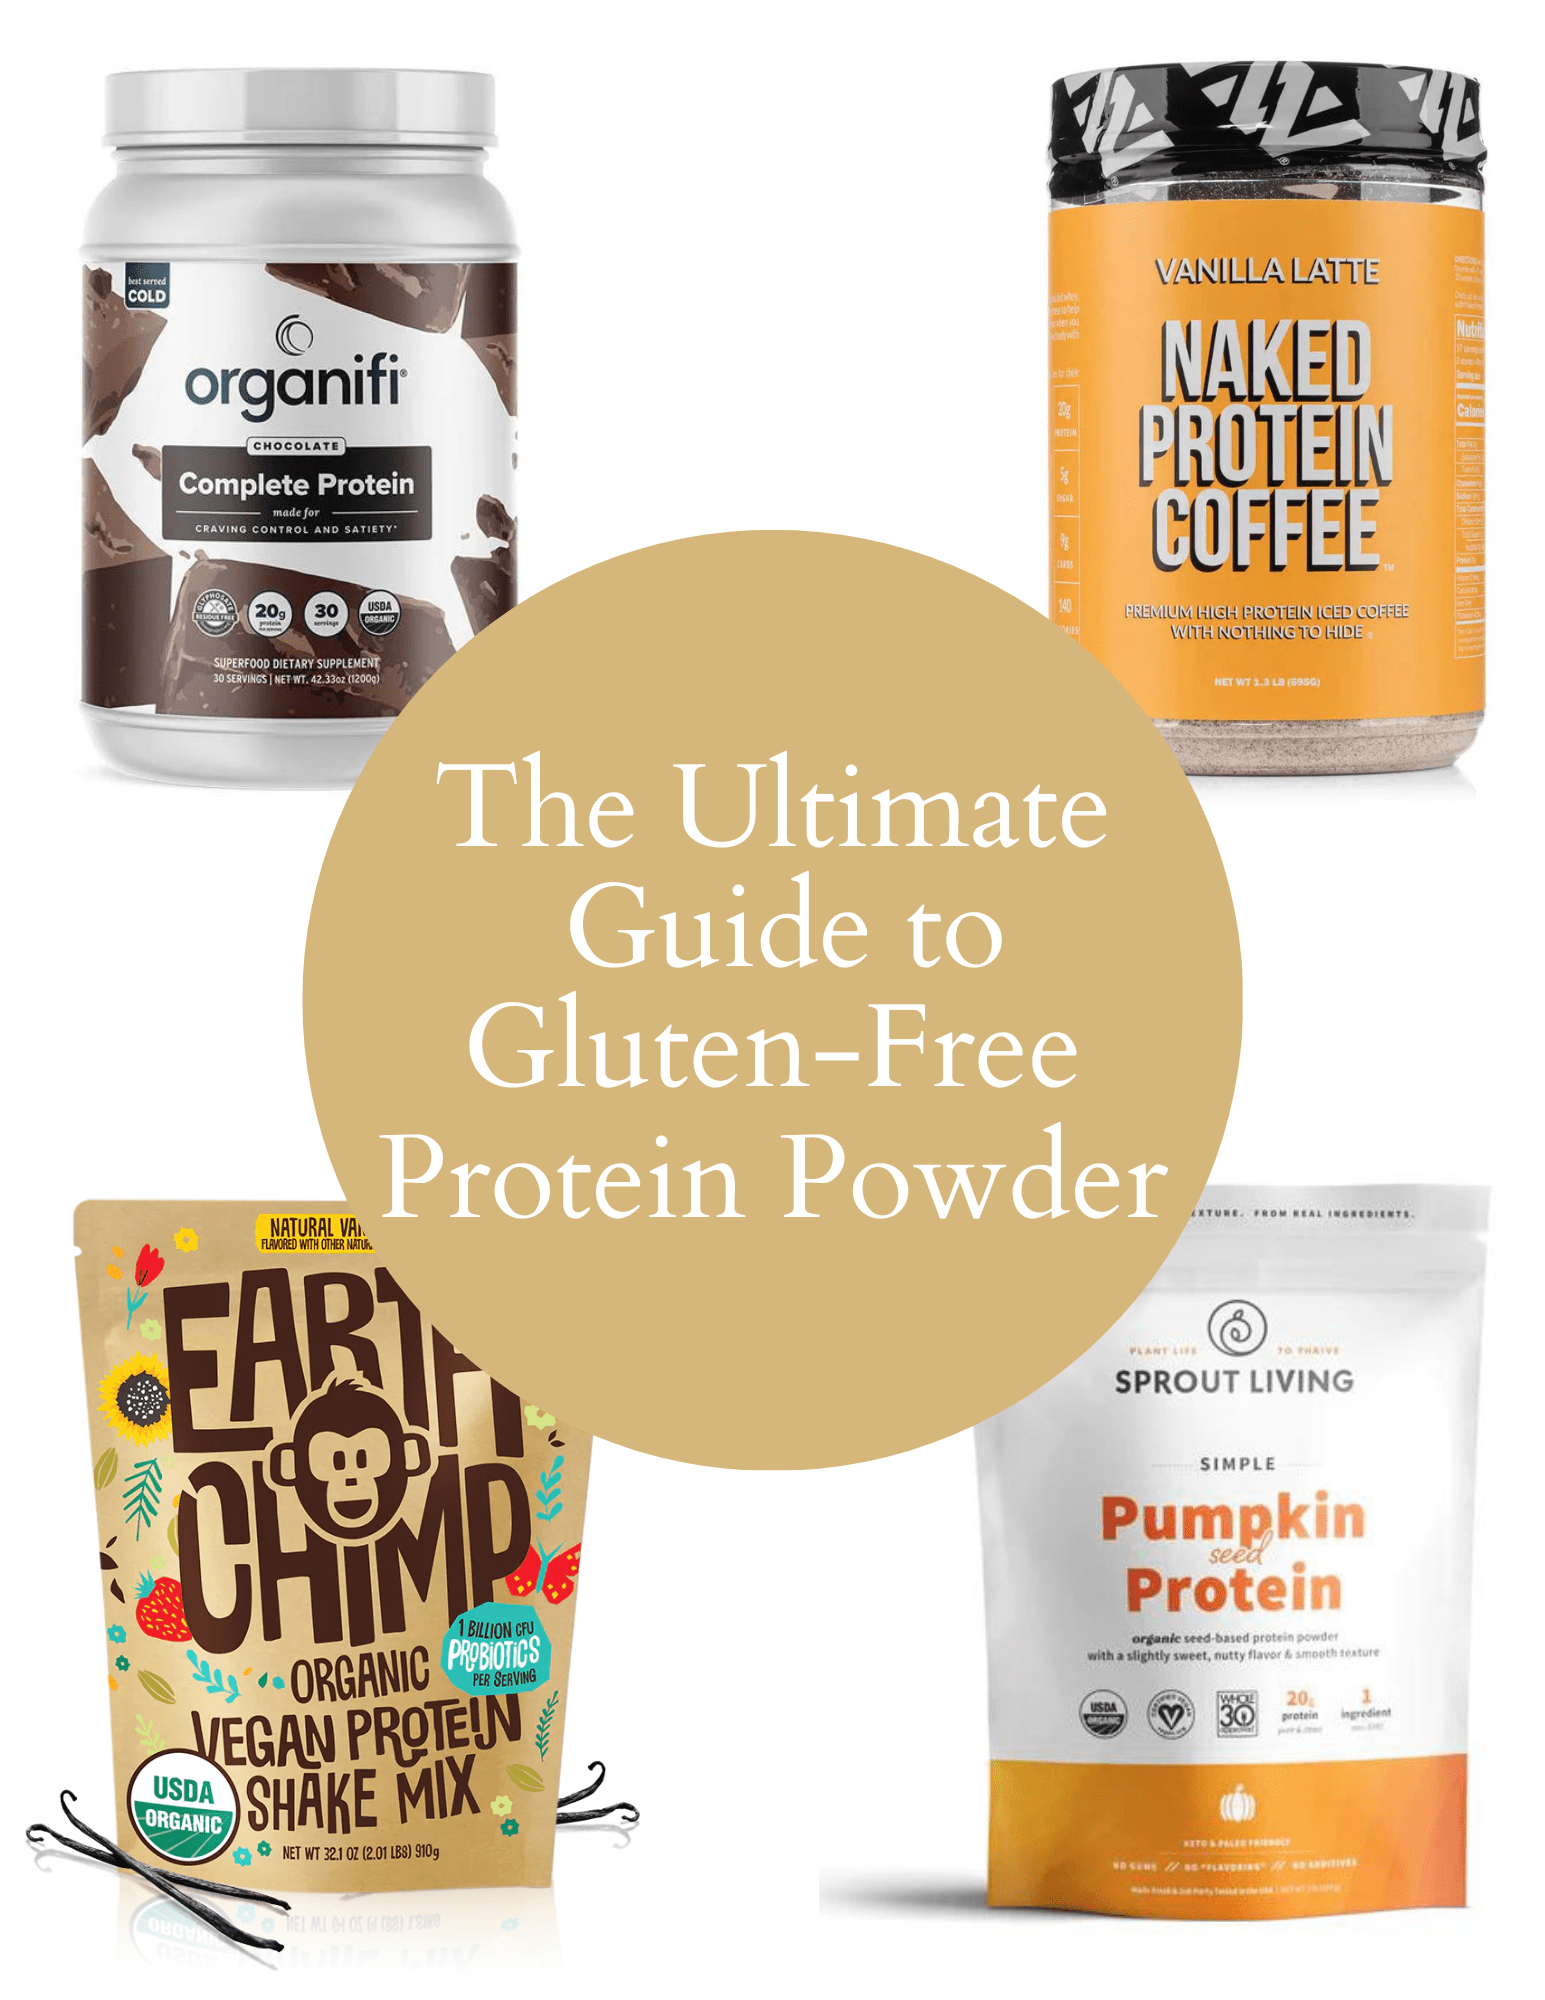 The Ultimate Guide to Gluten-Free Protein Powder